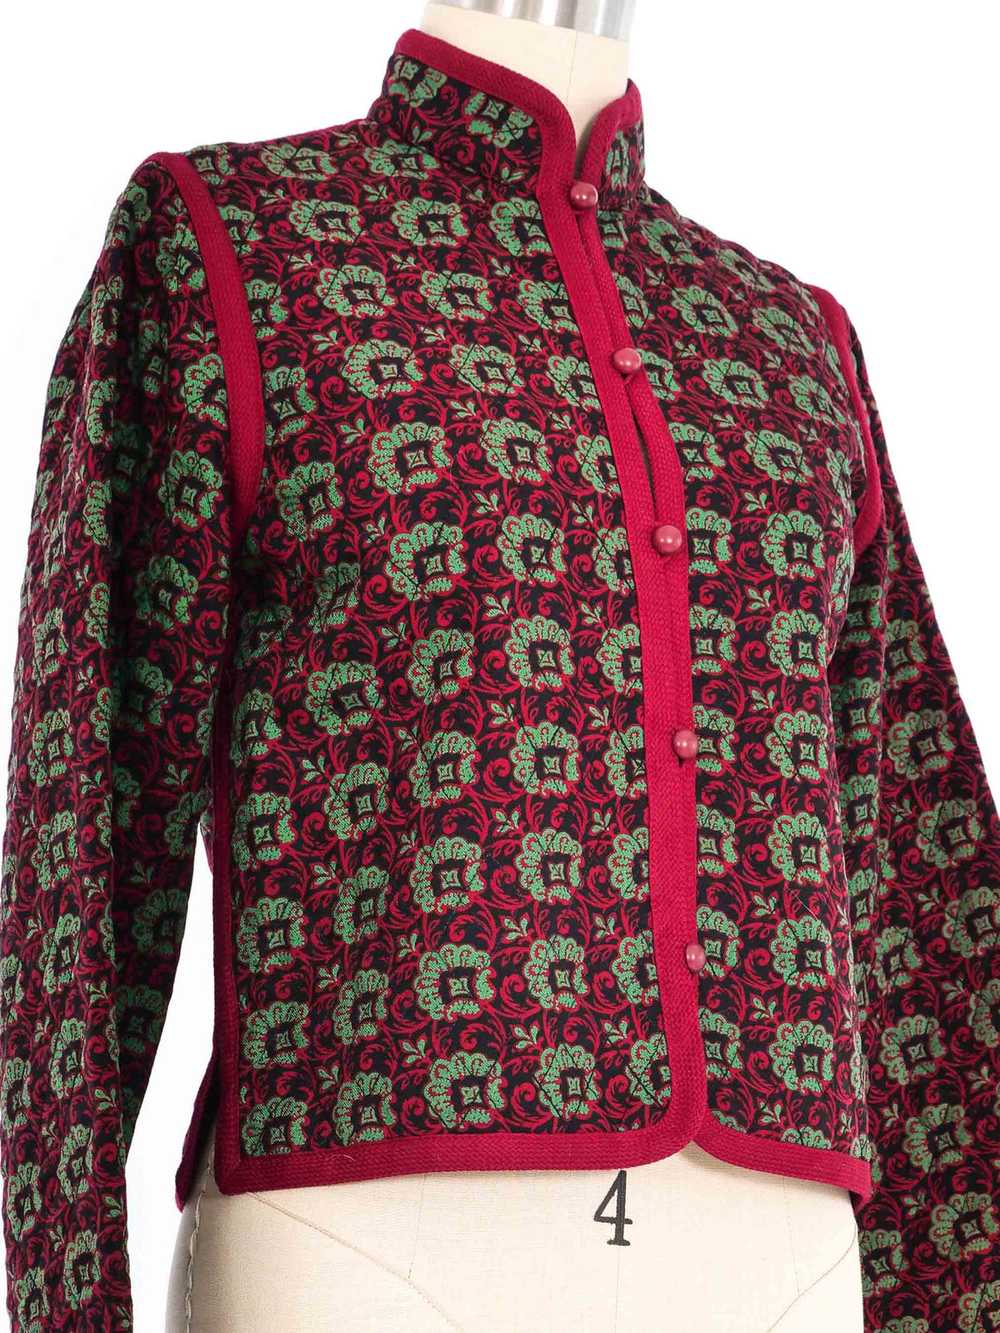 Yves Saint Laurent Quilted Jacket - image 2